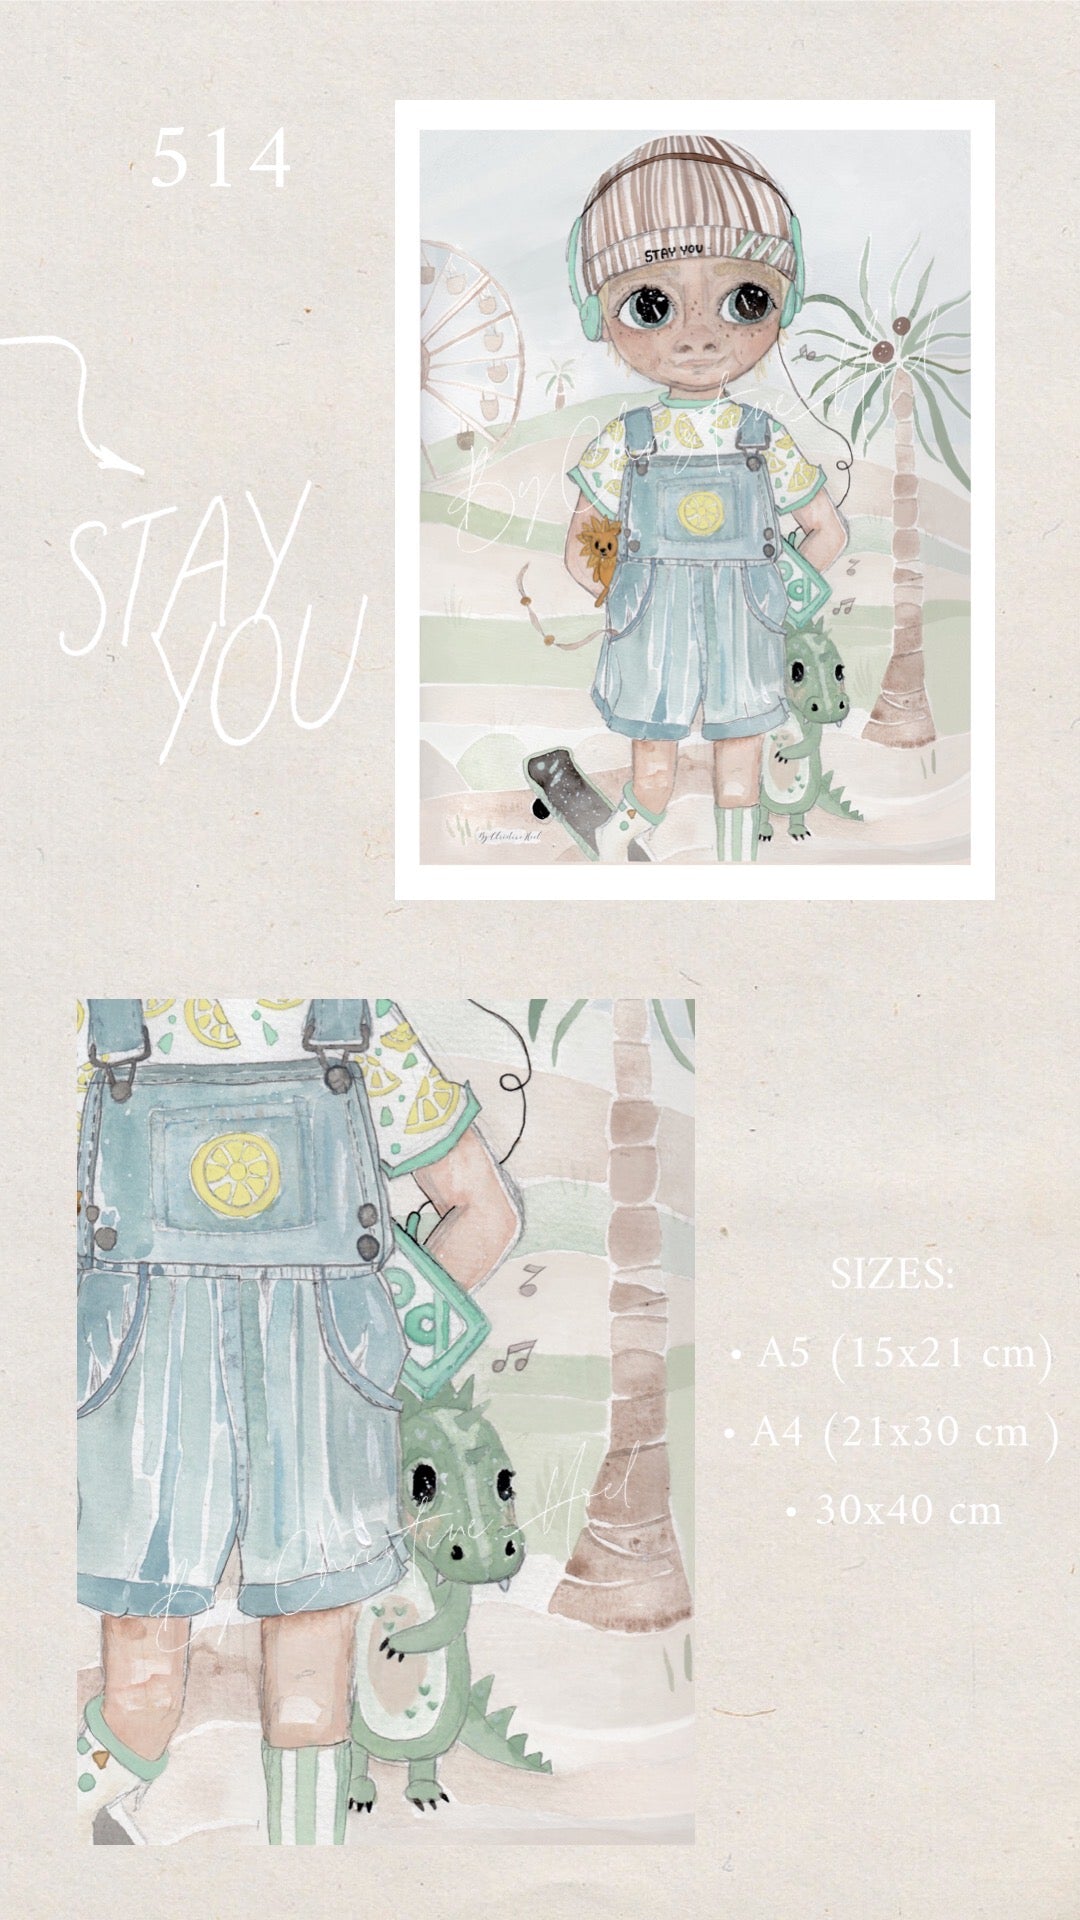 Stay You